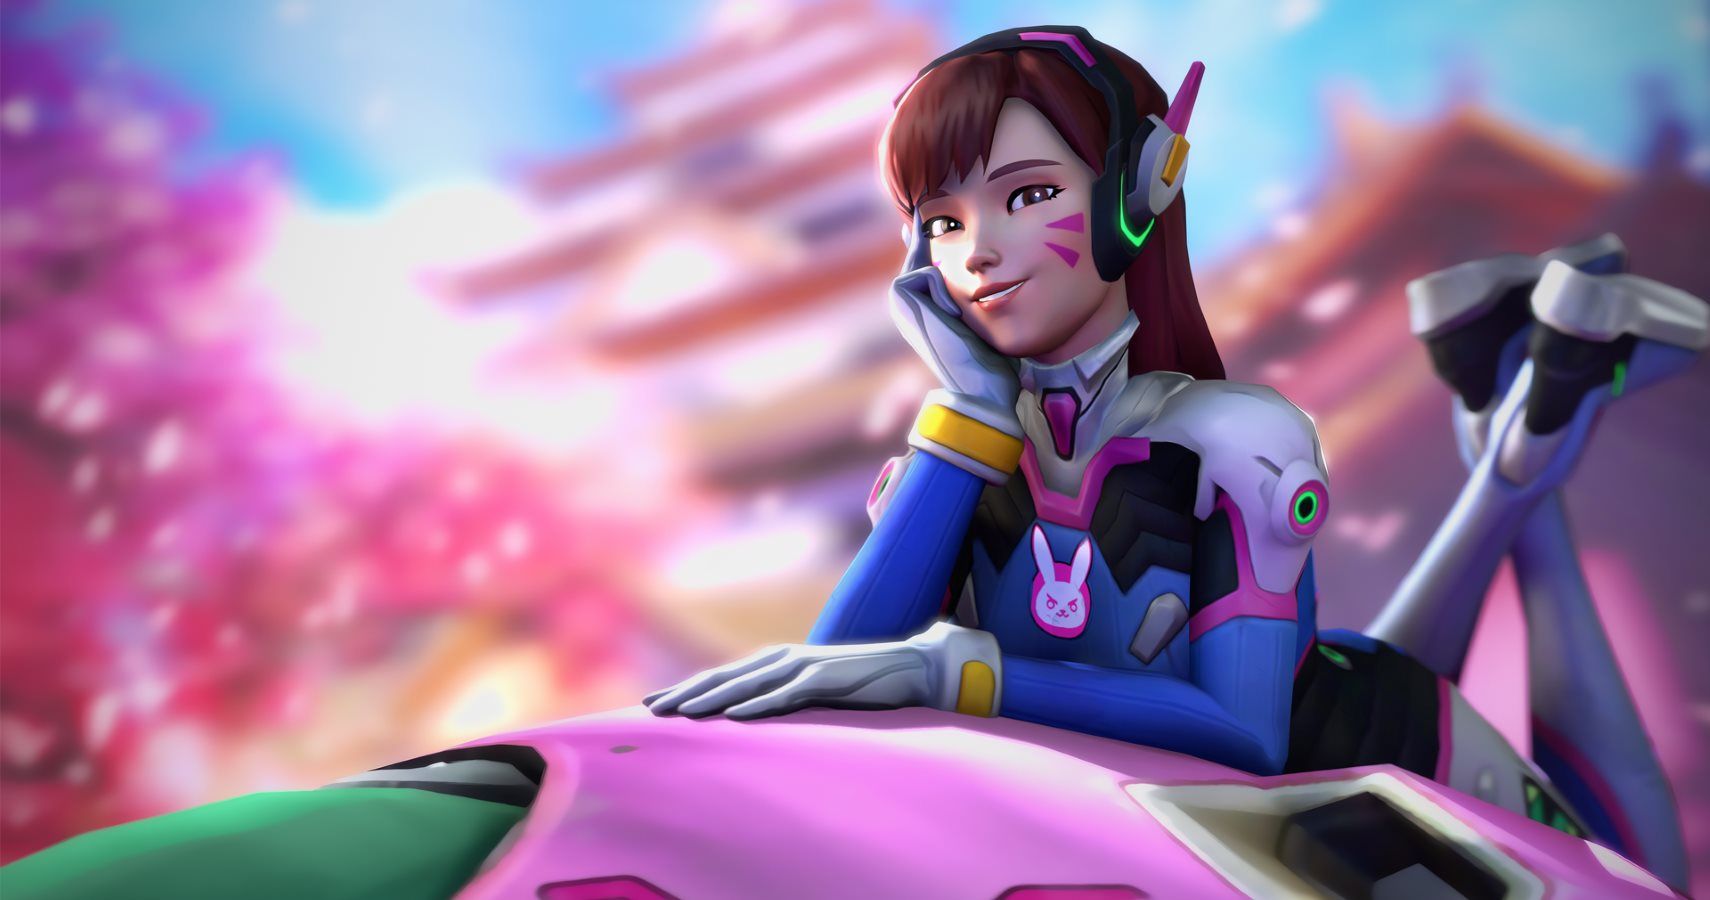 Overwatch: D.Va Is The Most-Played Character At All Levels